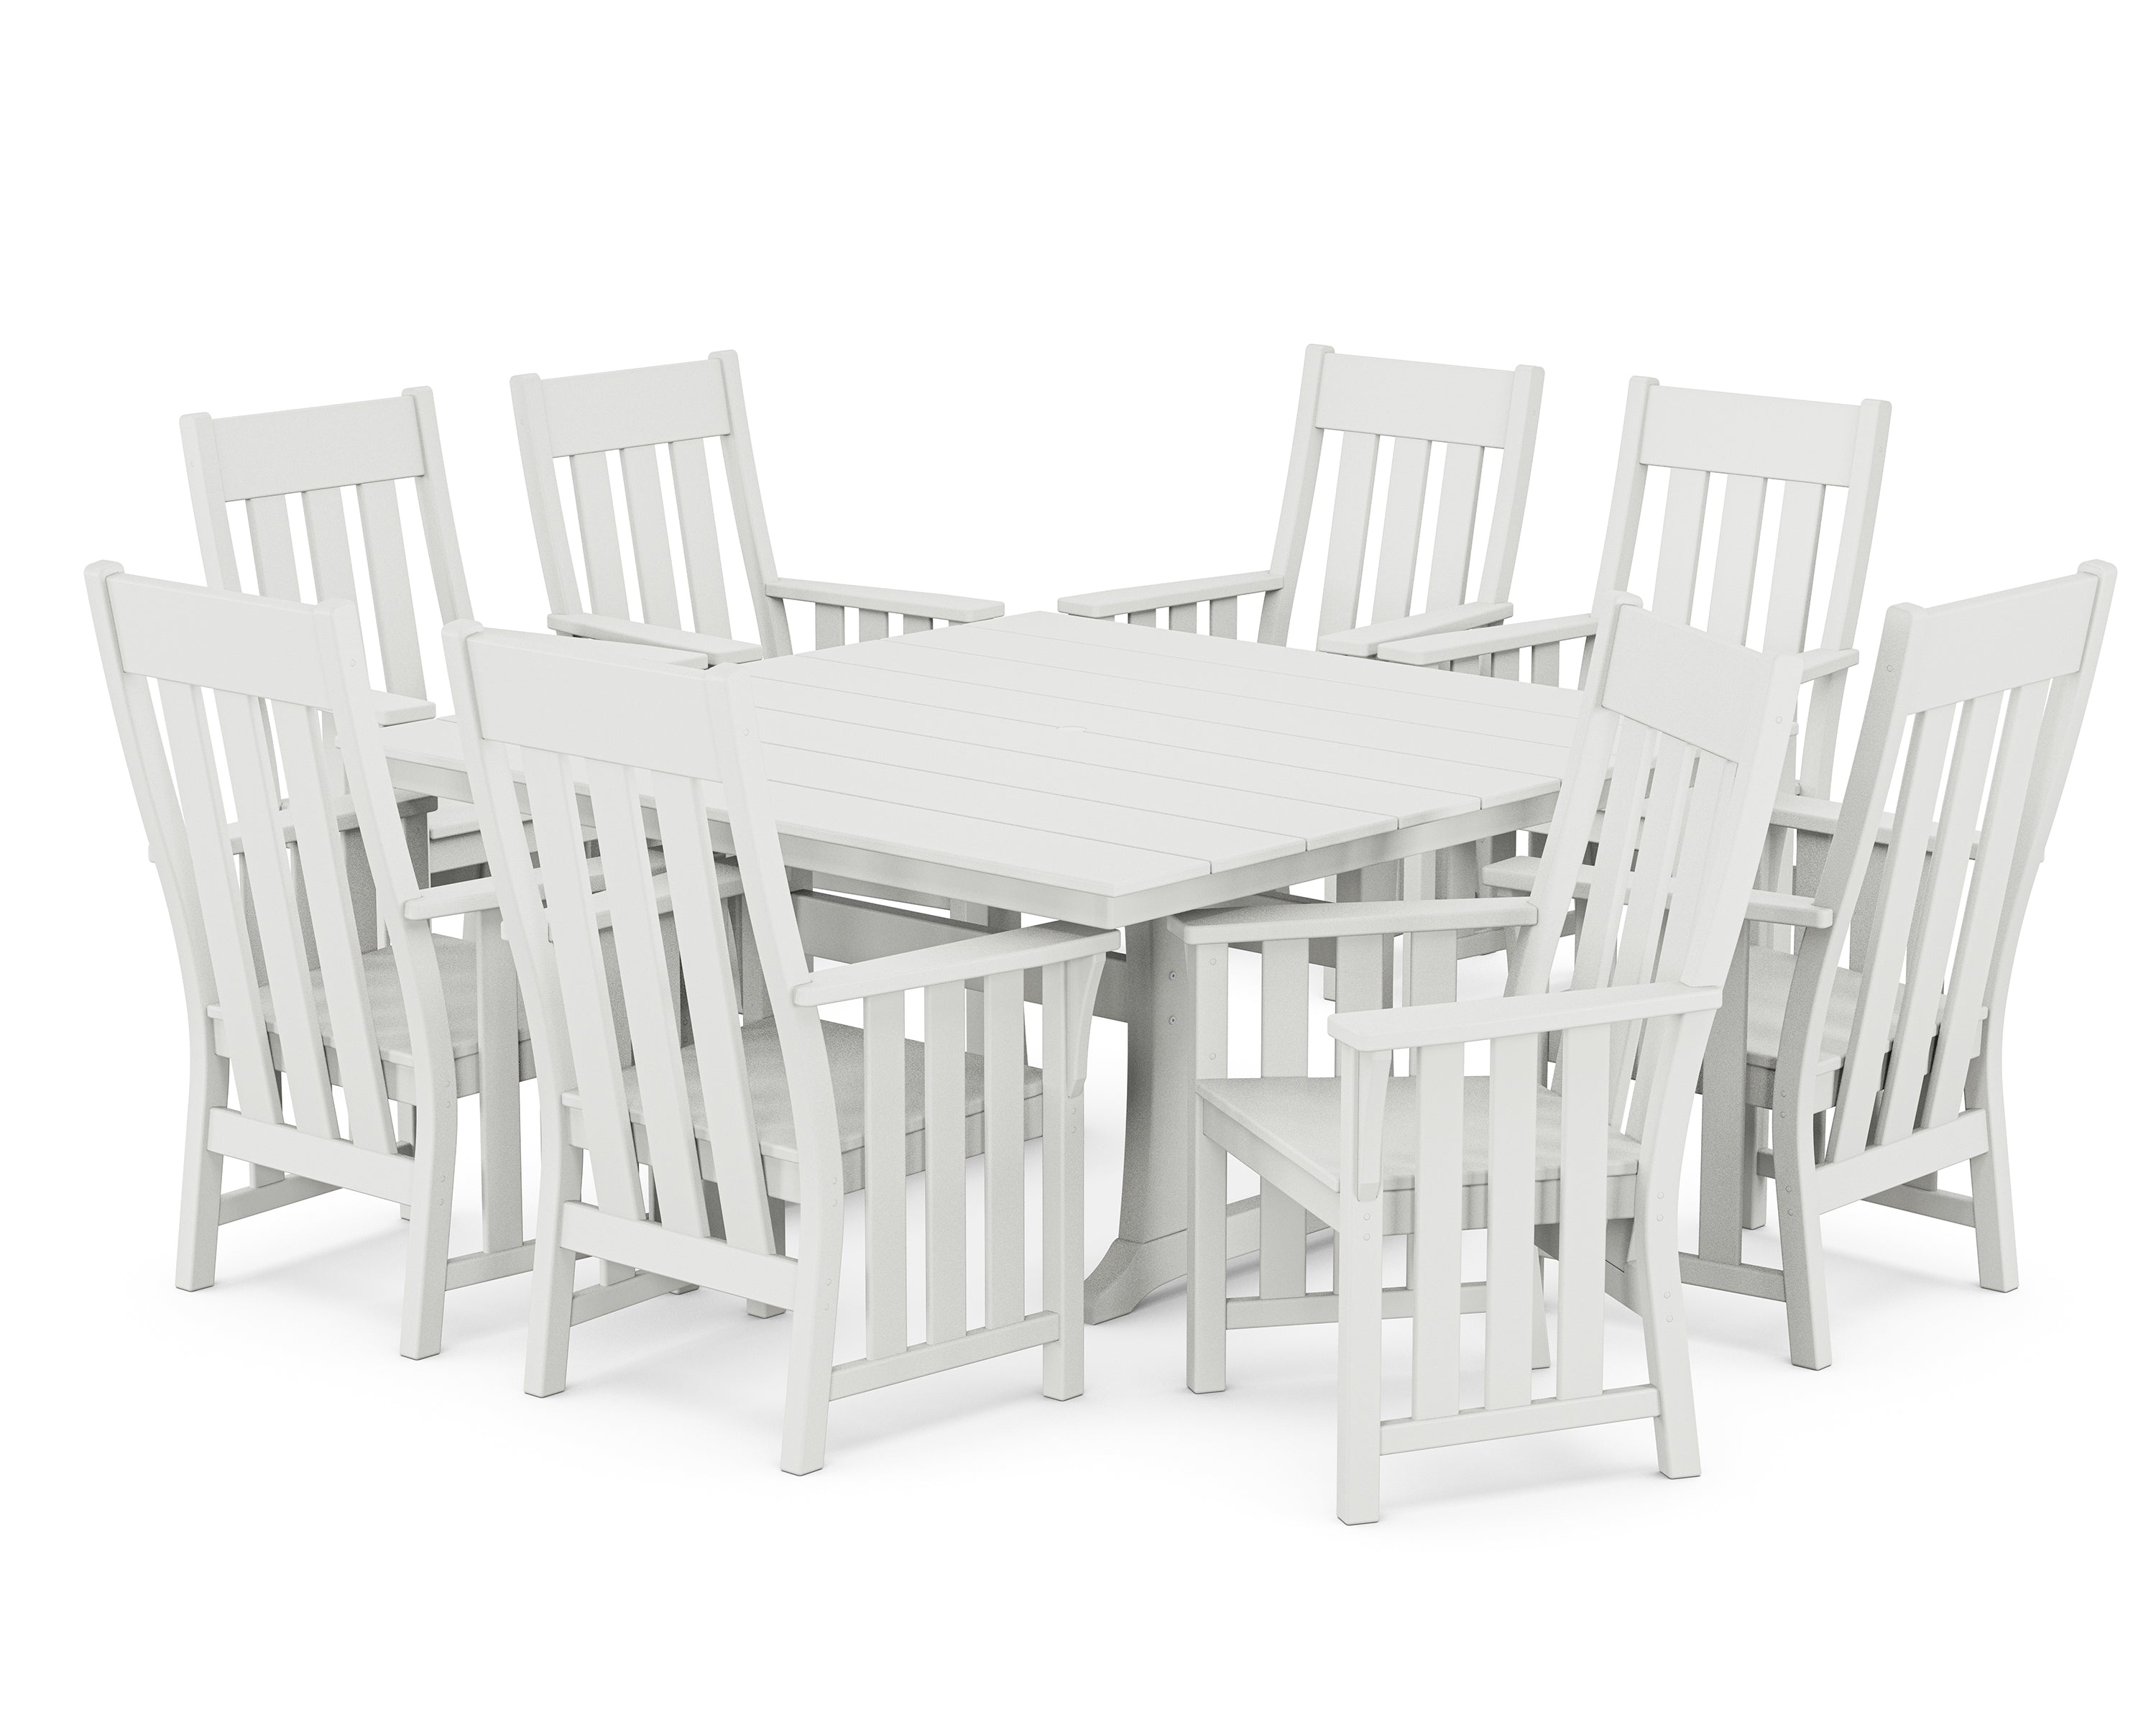 Martha Stewart by POLYWOOD® Acadia 9-Piece Square Farmhouse Dining Set with Trestle Legs in White